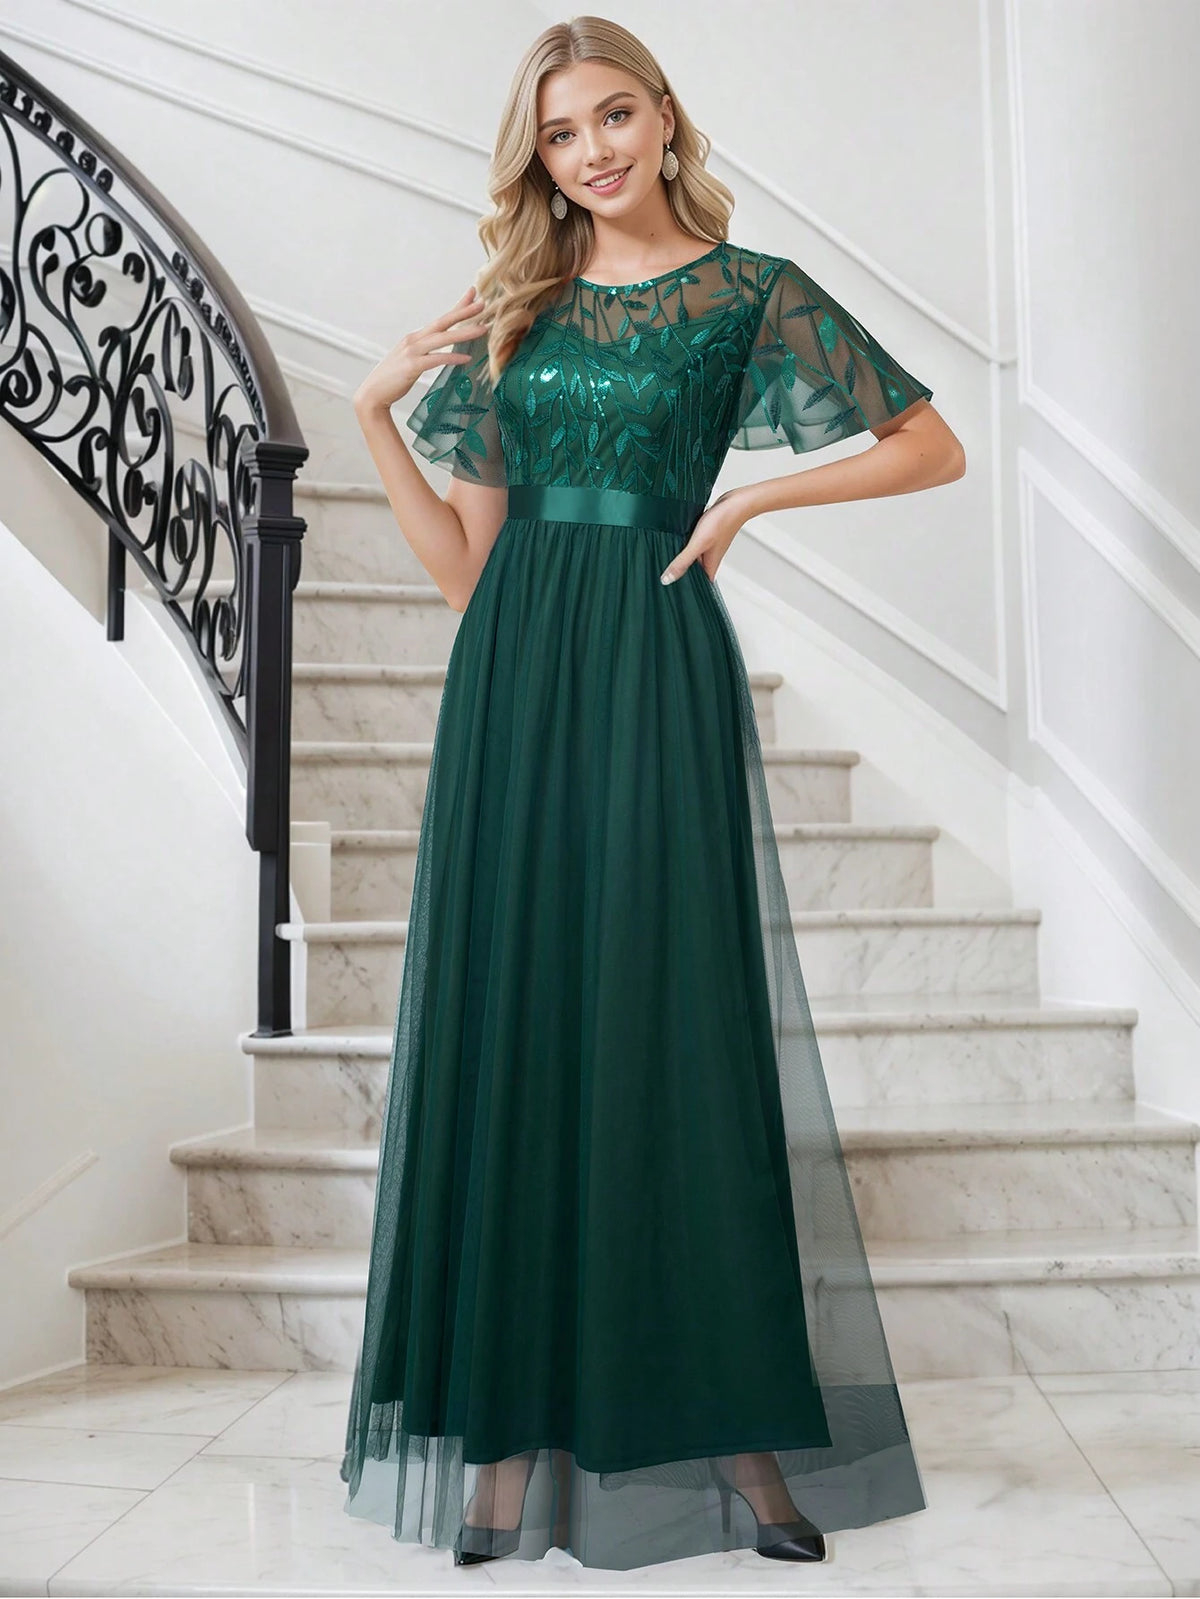 HOMEYEE Round Neckline Dressy Mesh Dress With Ruffle Sleeves And Sparkly Sequin Detailing, Great For Vacation And Evening Party